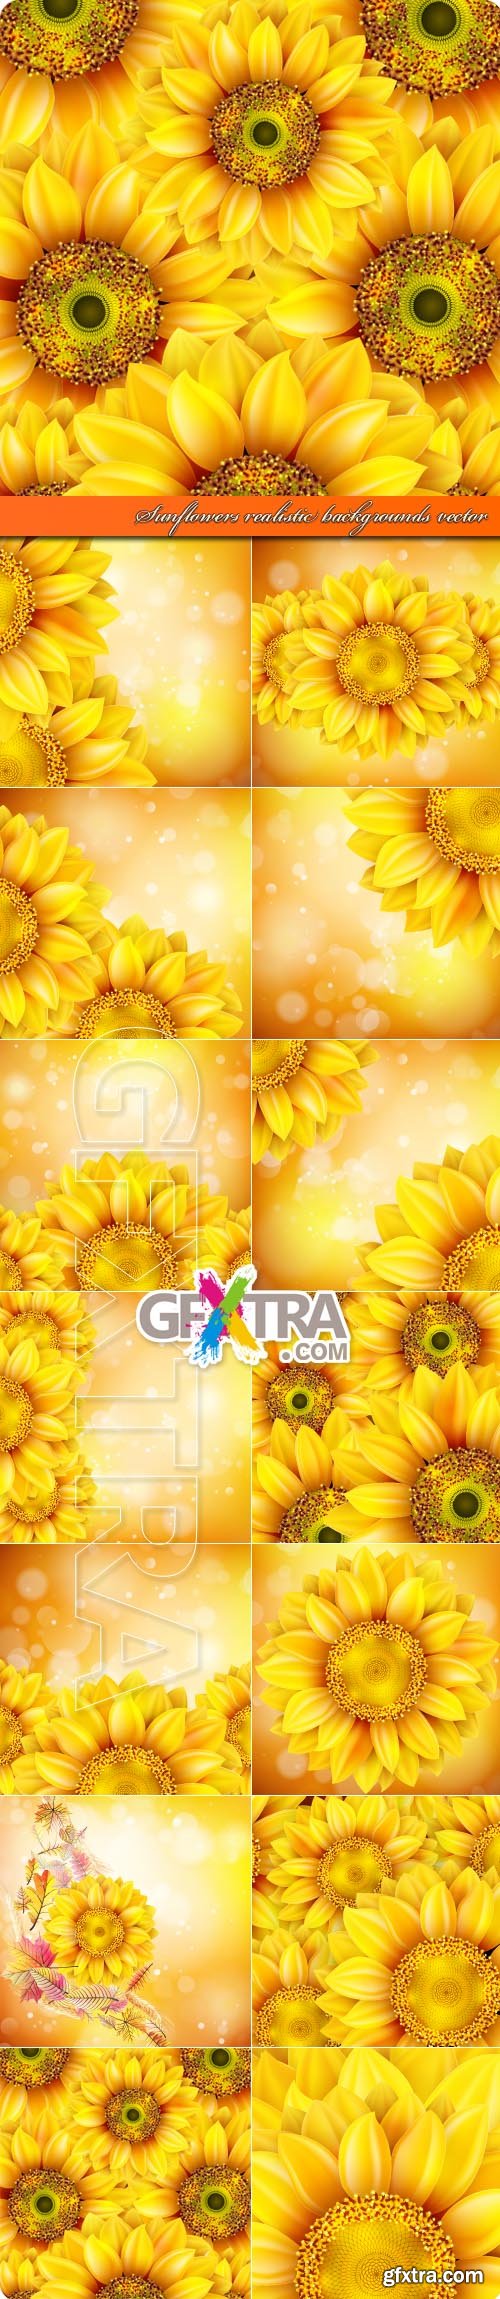 Sunflowers realistic backgrounds vector